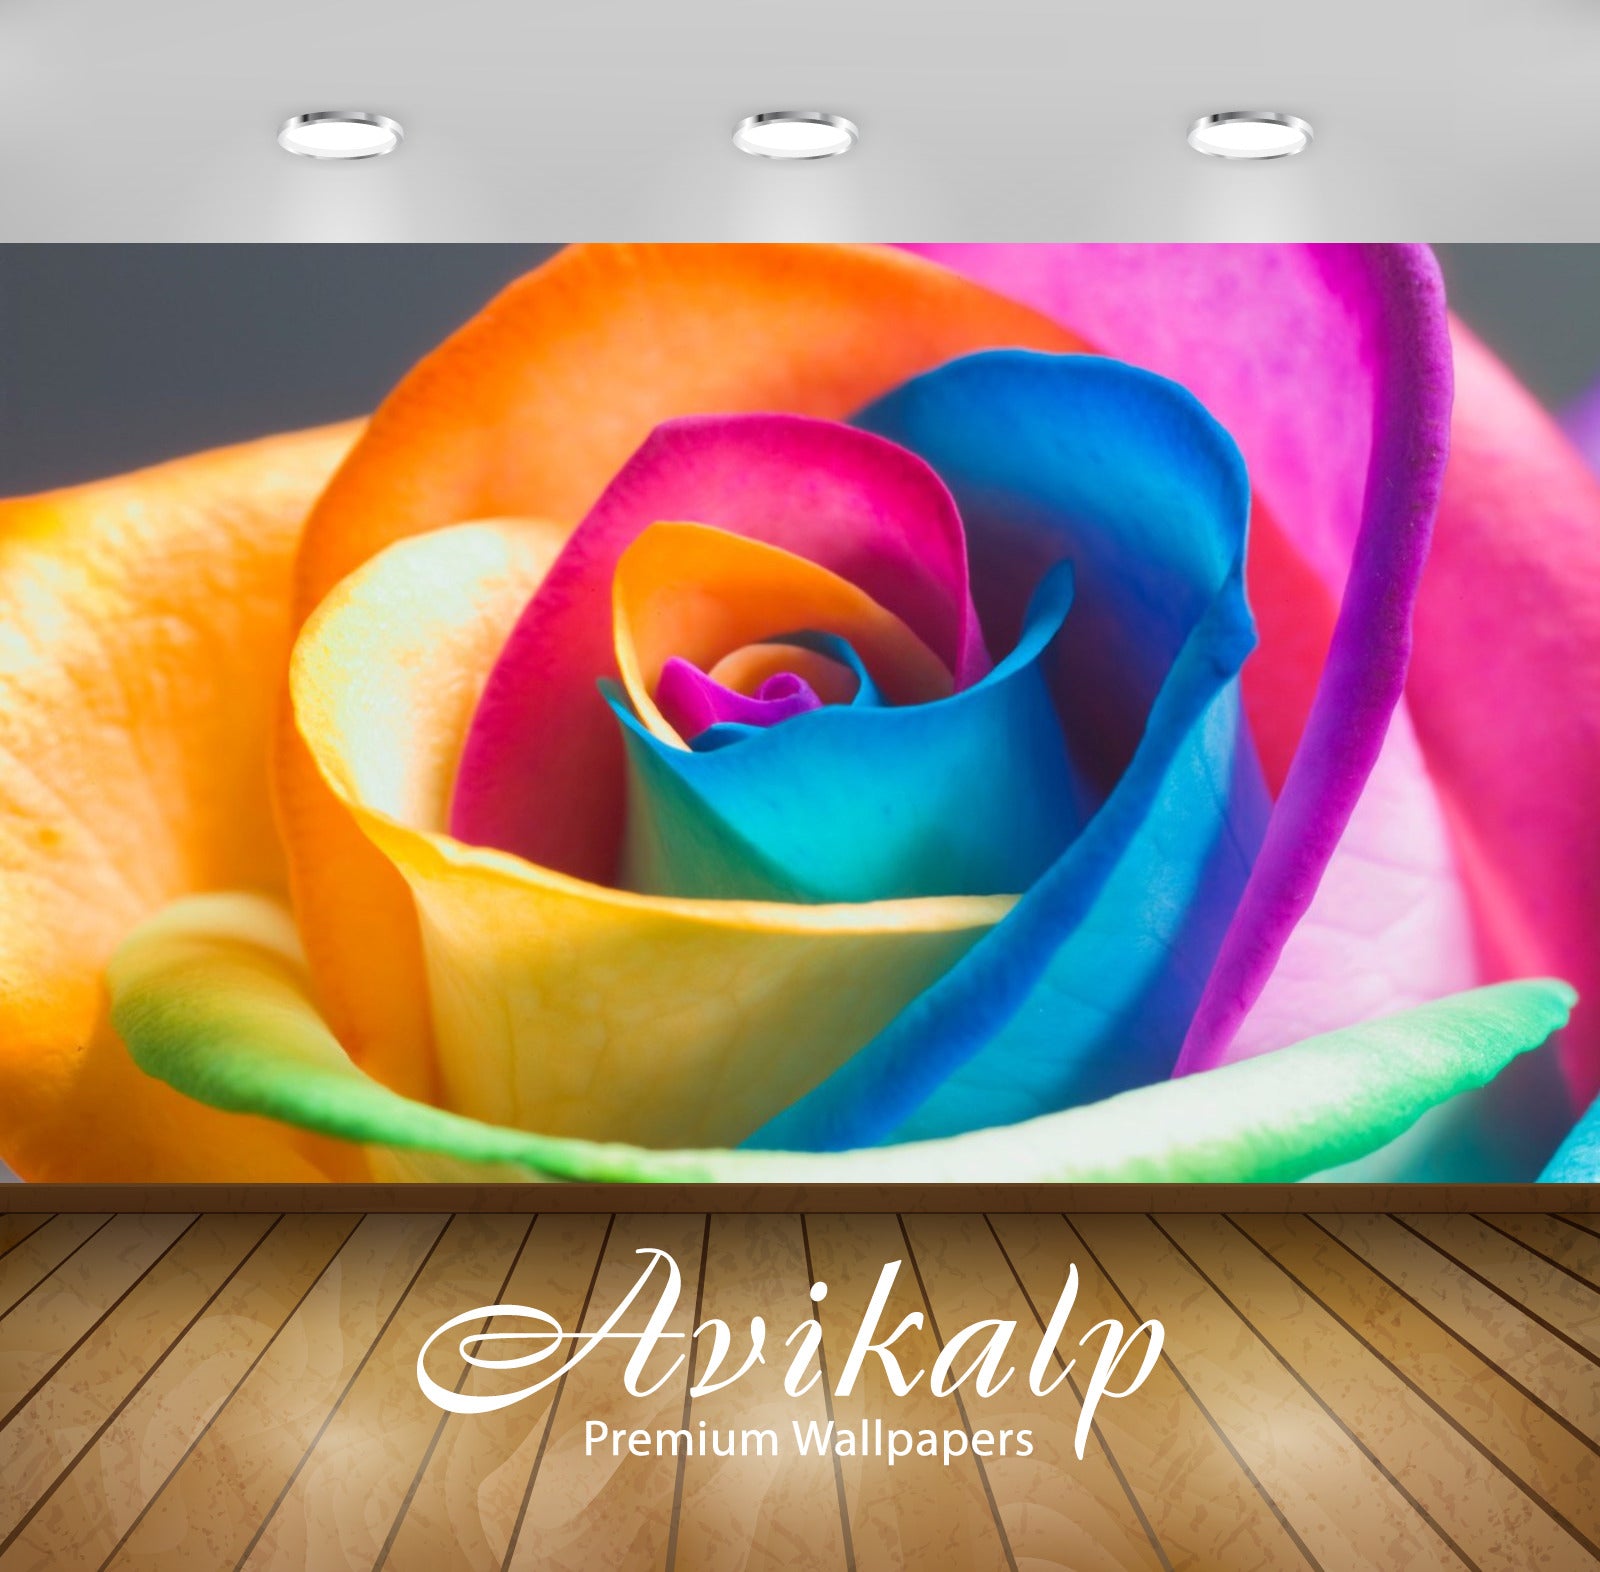 Avikalp Exclusive Awi1261 Multicolour Rose Full HD Wallpapers for Living room, Hall, Kids Room, Kitc